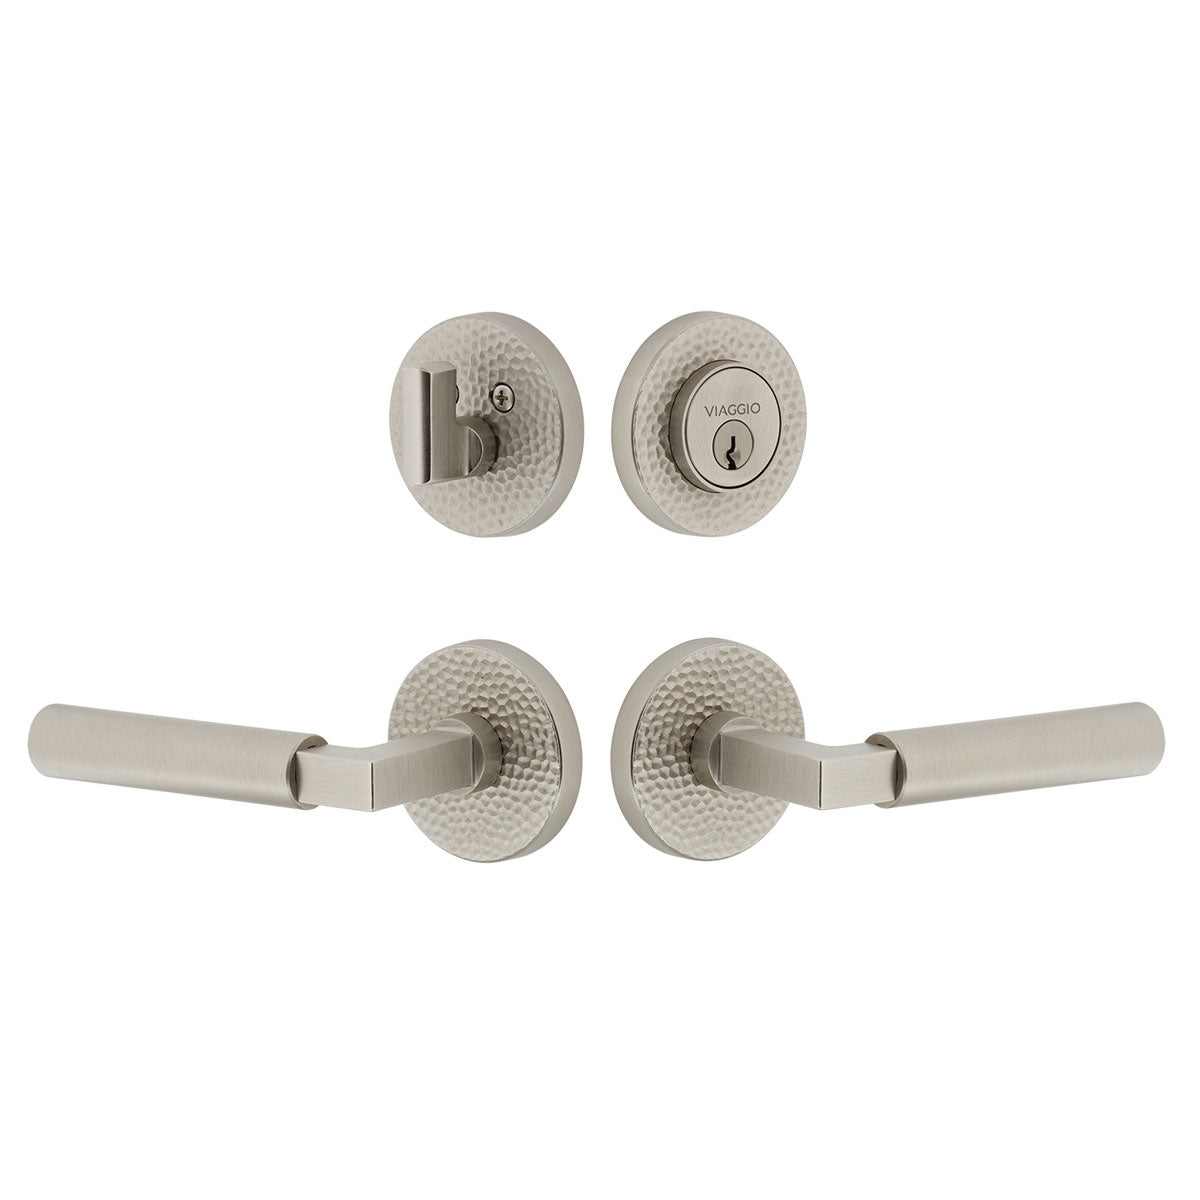 Circolo Hammered Rosette Entry Set with Contempo Lever in Satin Nickel